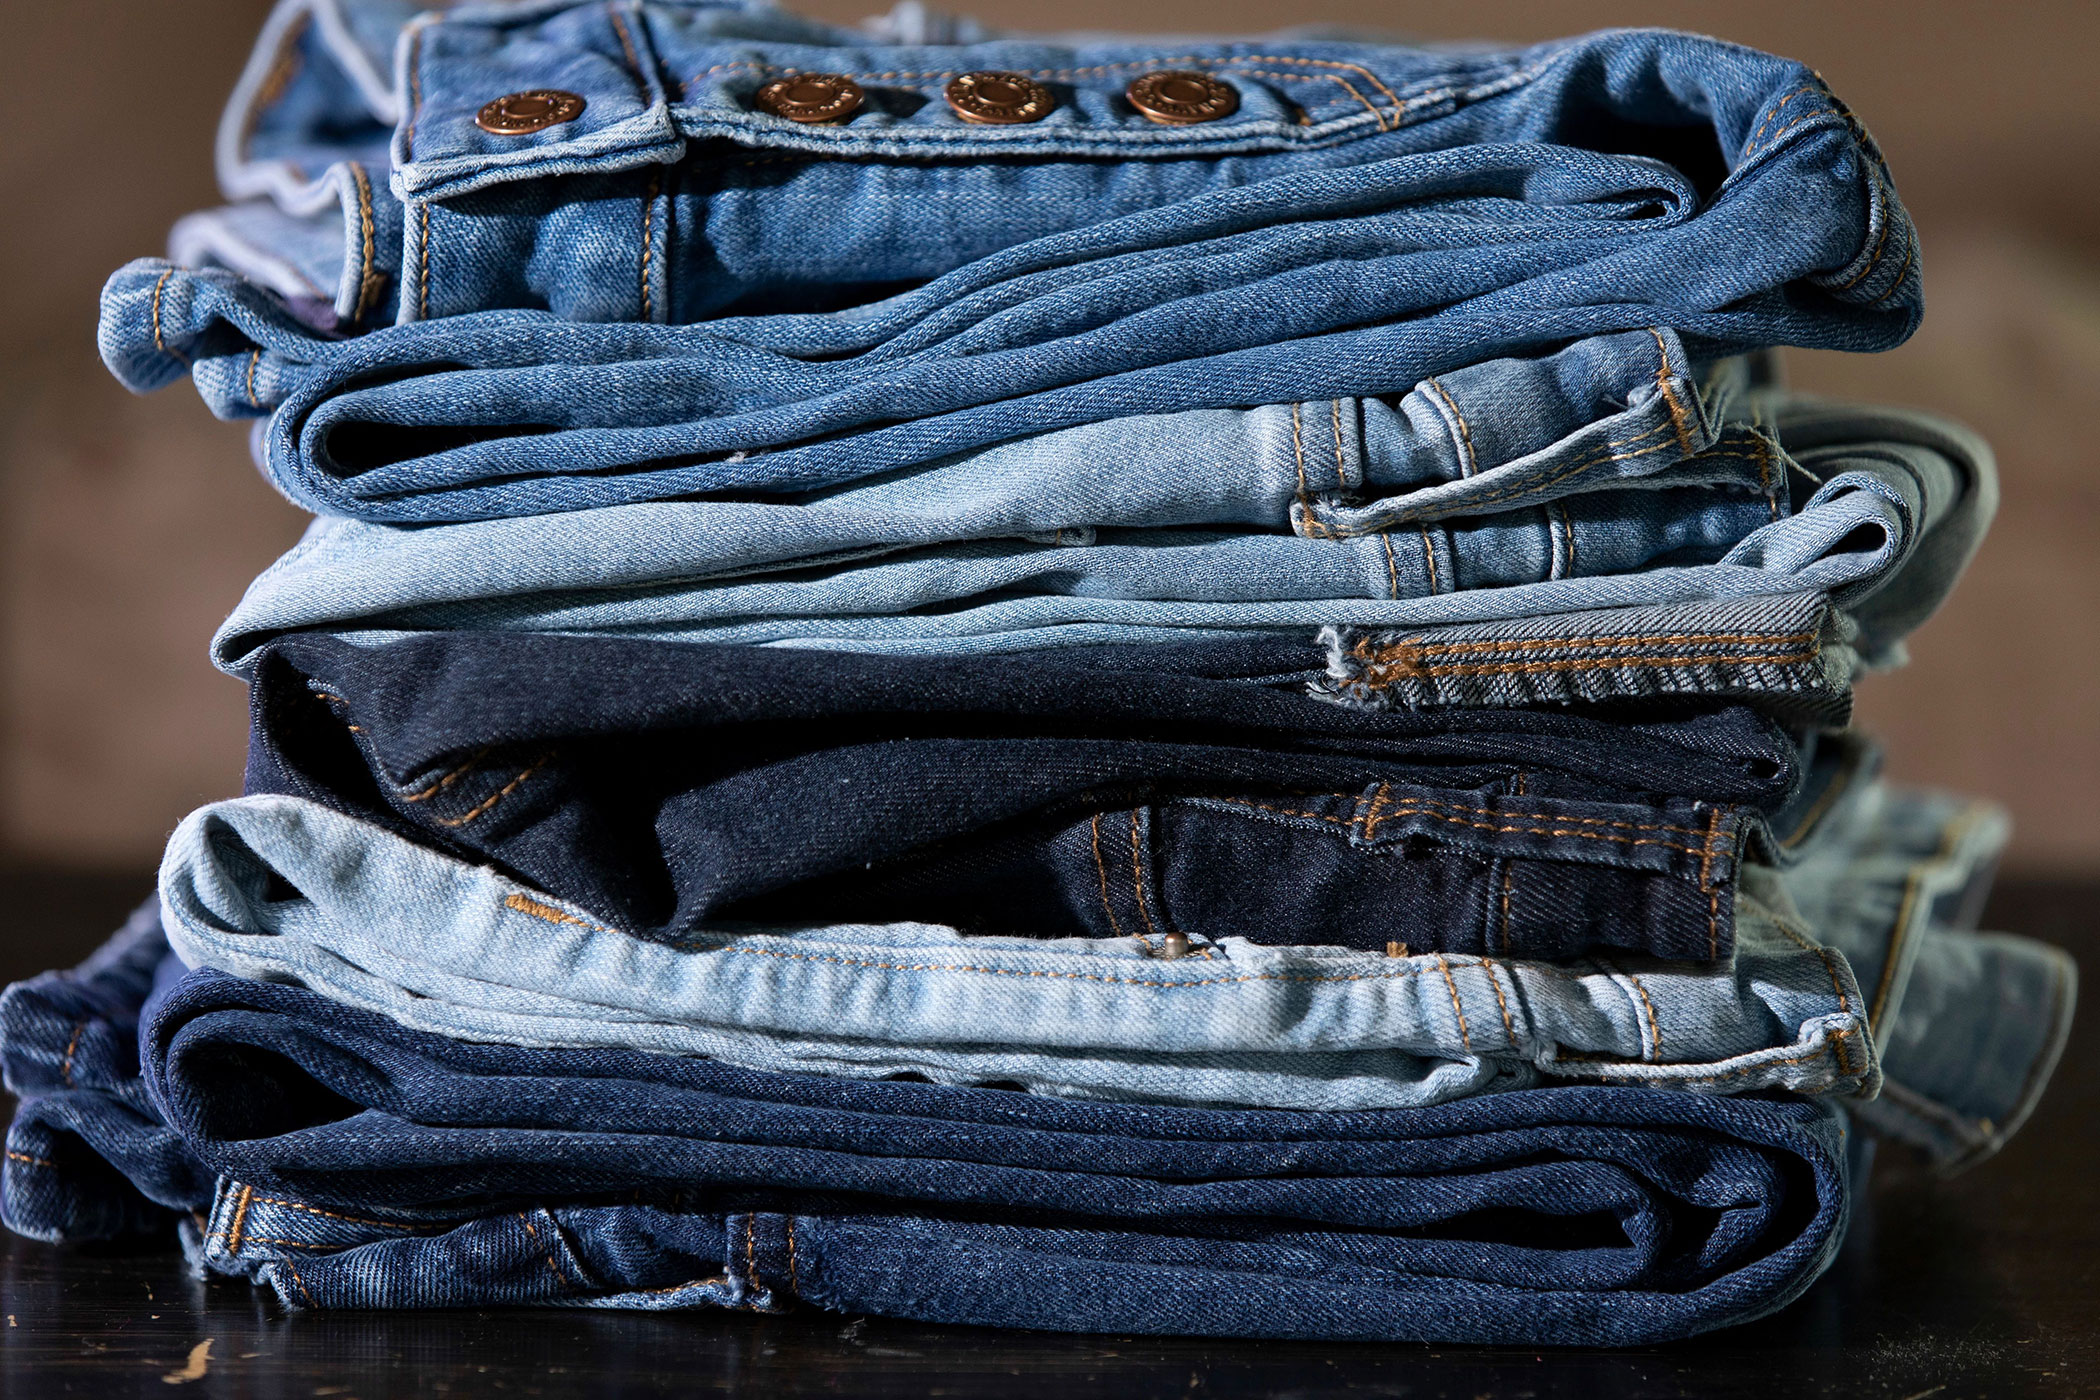 File sail Bald Scientists find eco-friendly way to dye blue jeans